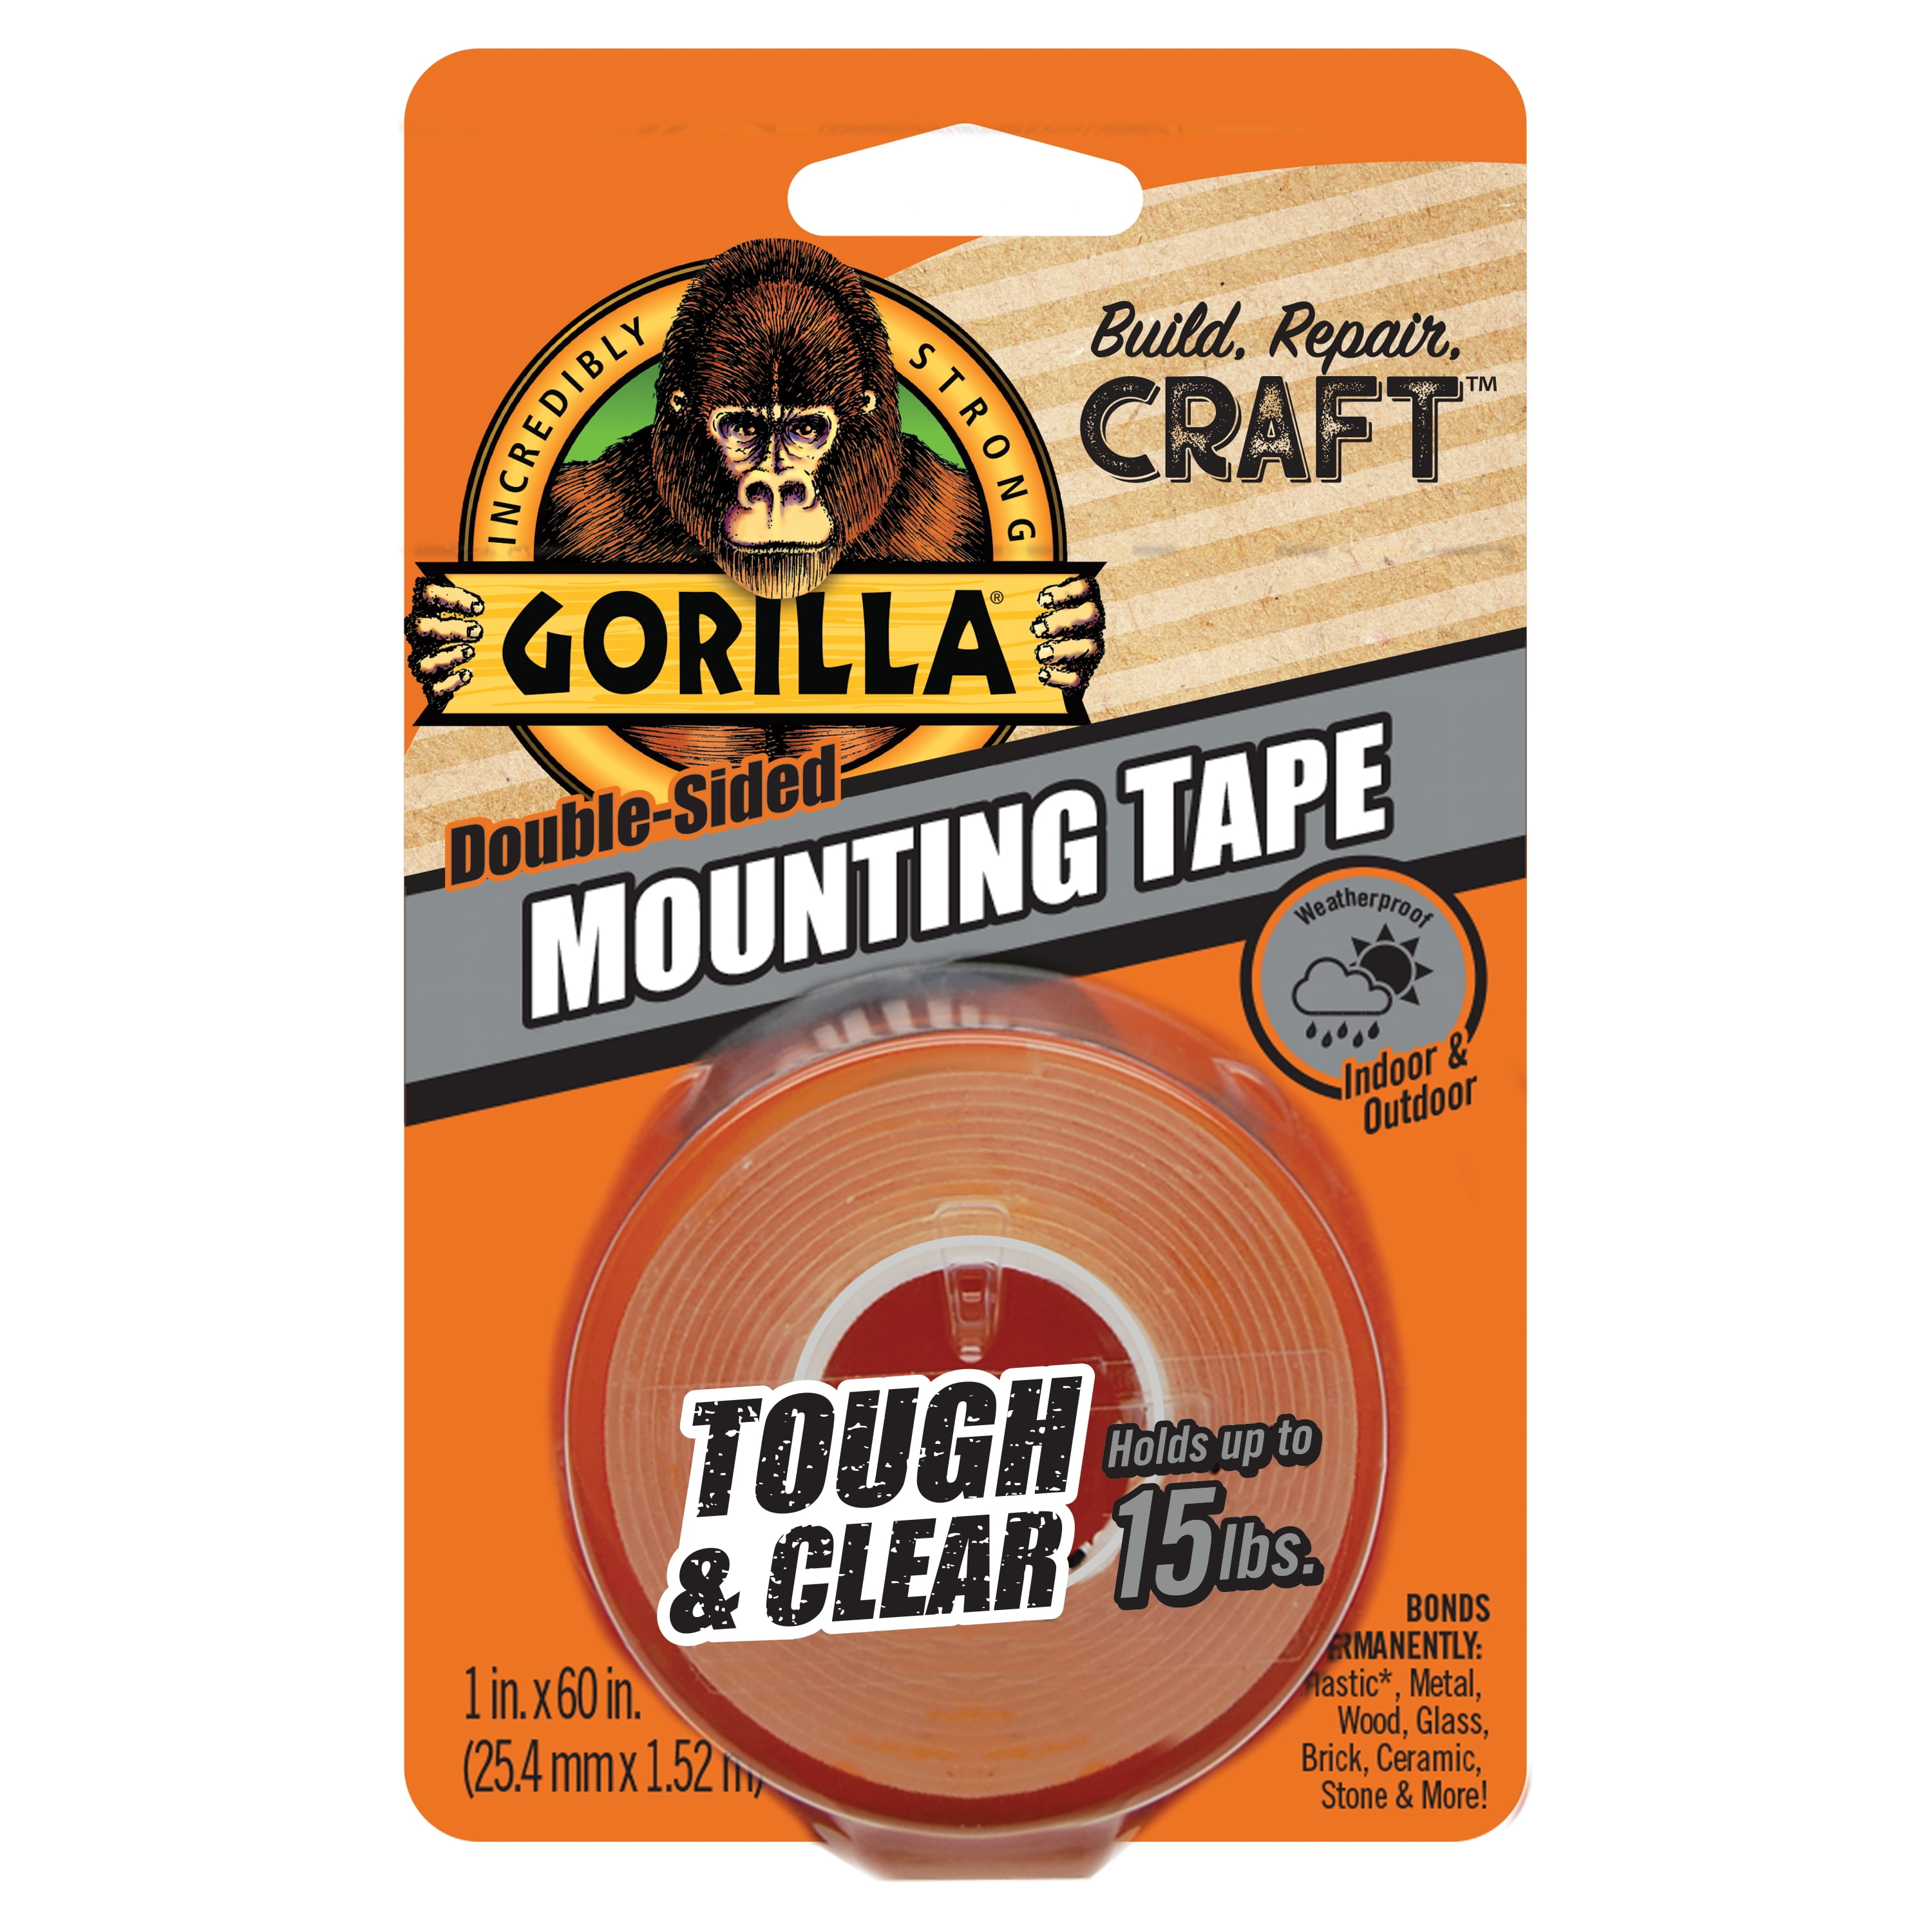  Bonding Forever Super Clear Gel Double Sided Tape, Foam Tape, Double  Sided Adhesive Tape, Mounting Tape